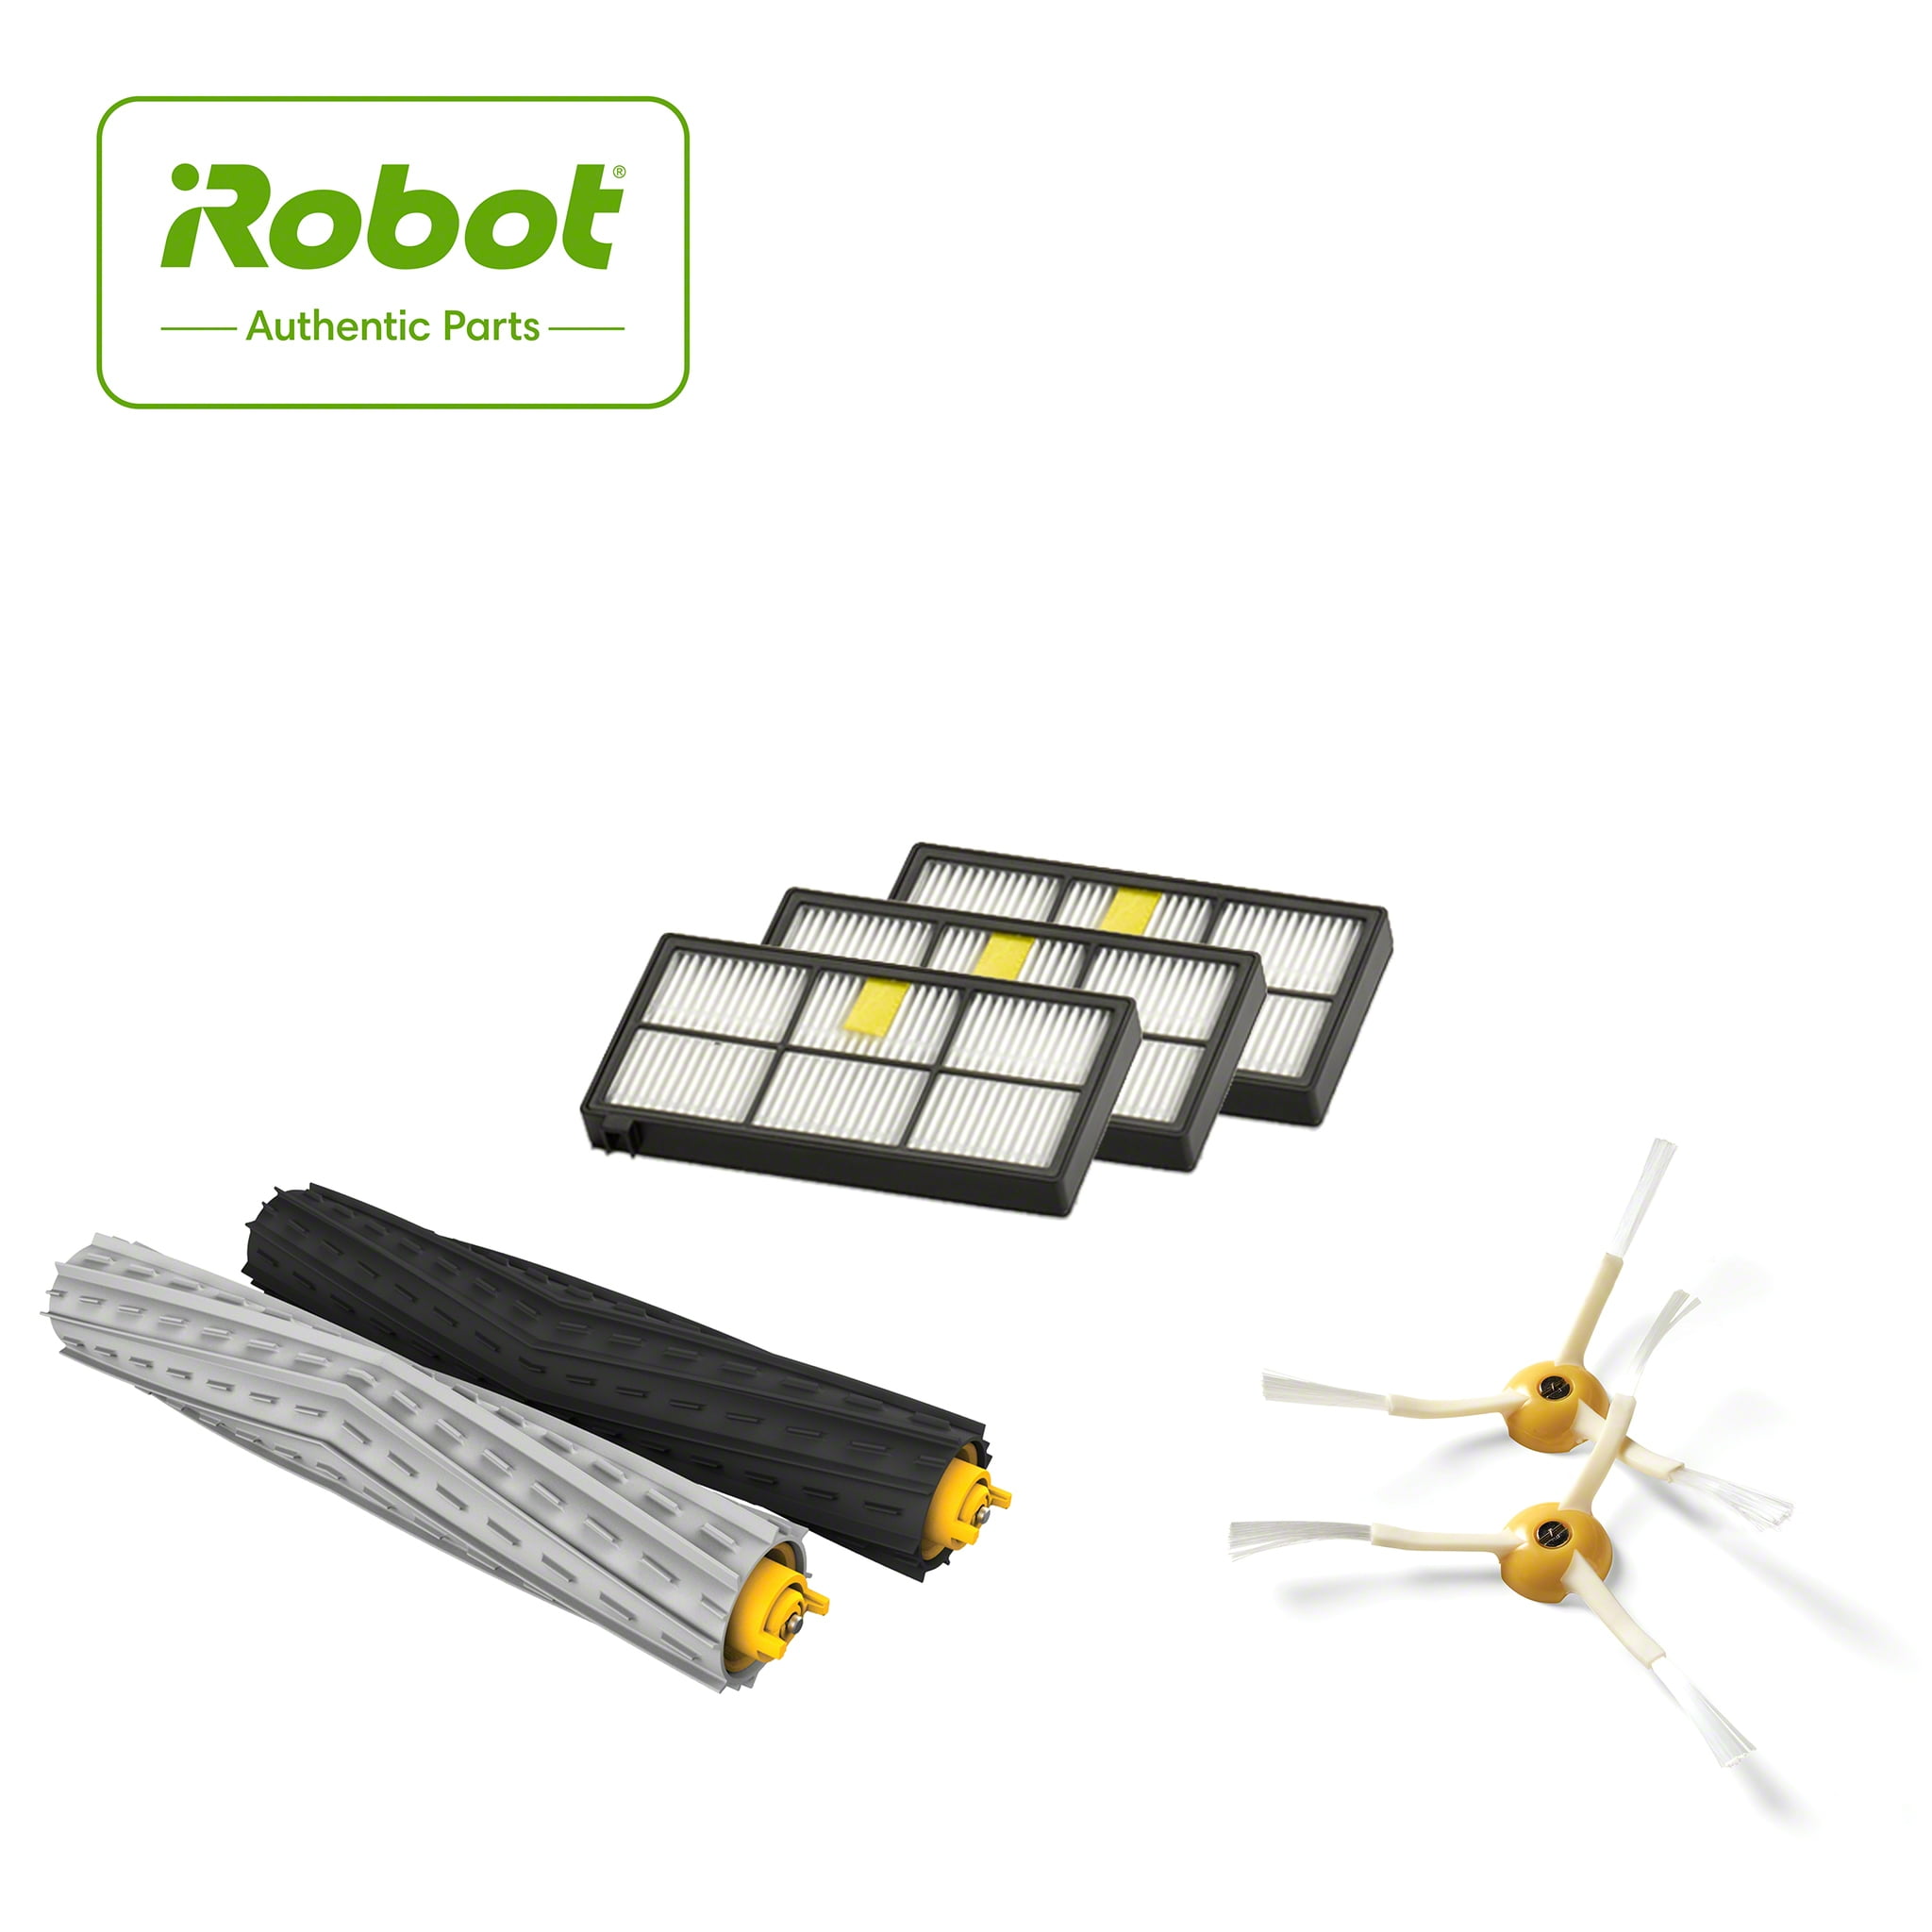 IRobot Roomba Brushes Sod Brush Kits for 800&900 Series Accessories Cover Parts 